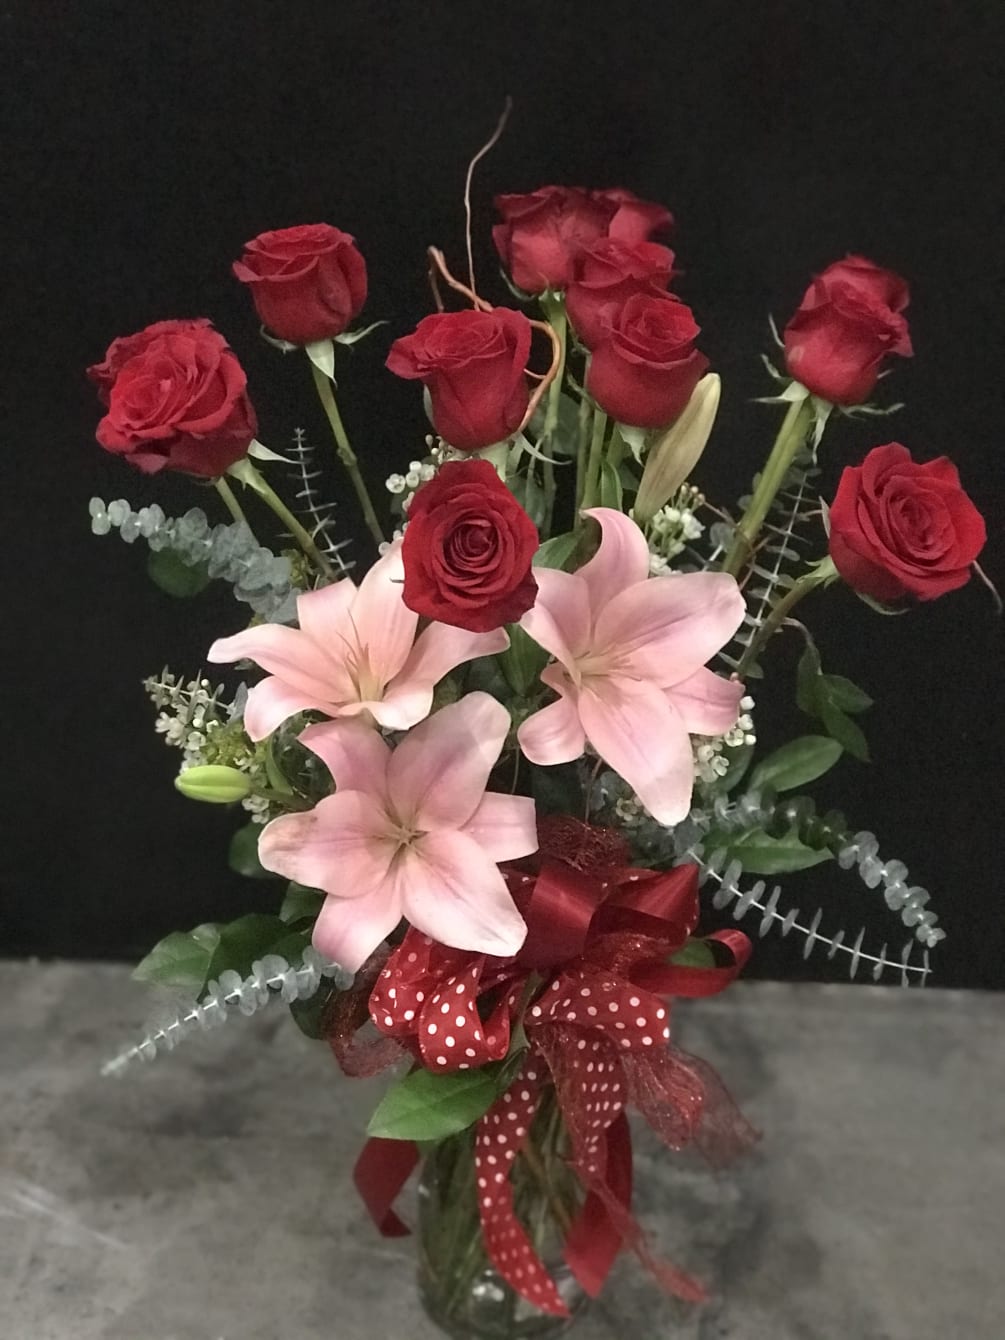 Dozen red rose with pink lilies